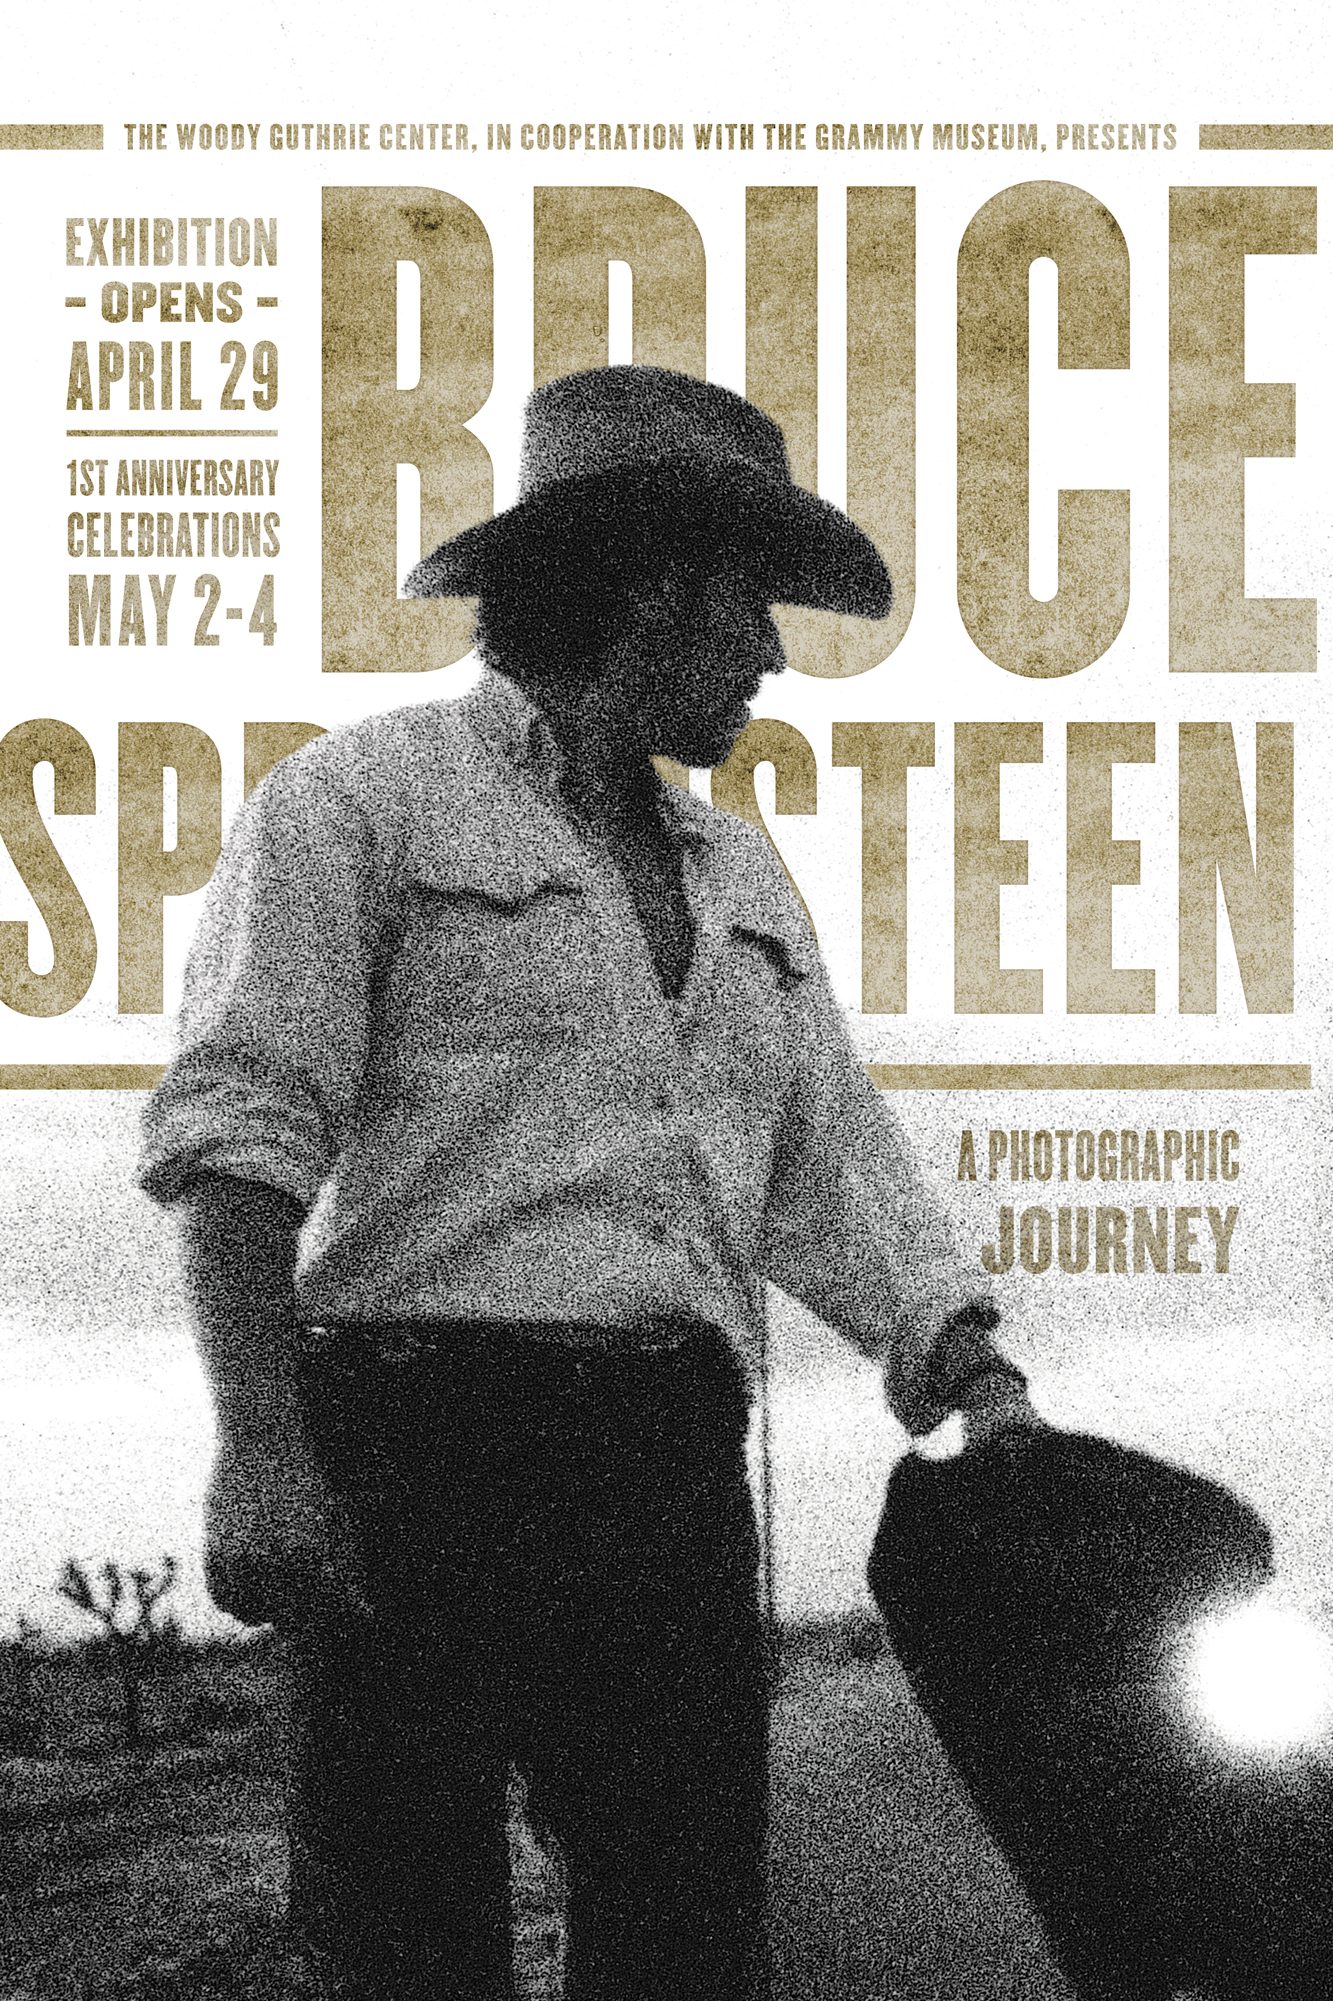 Woody Guthrie Center Bruce Springsteen Exhibition Booklet